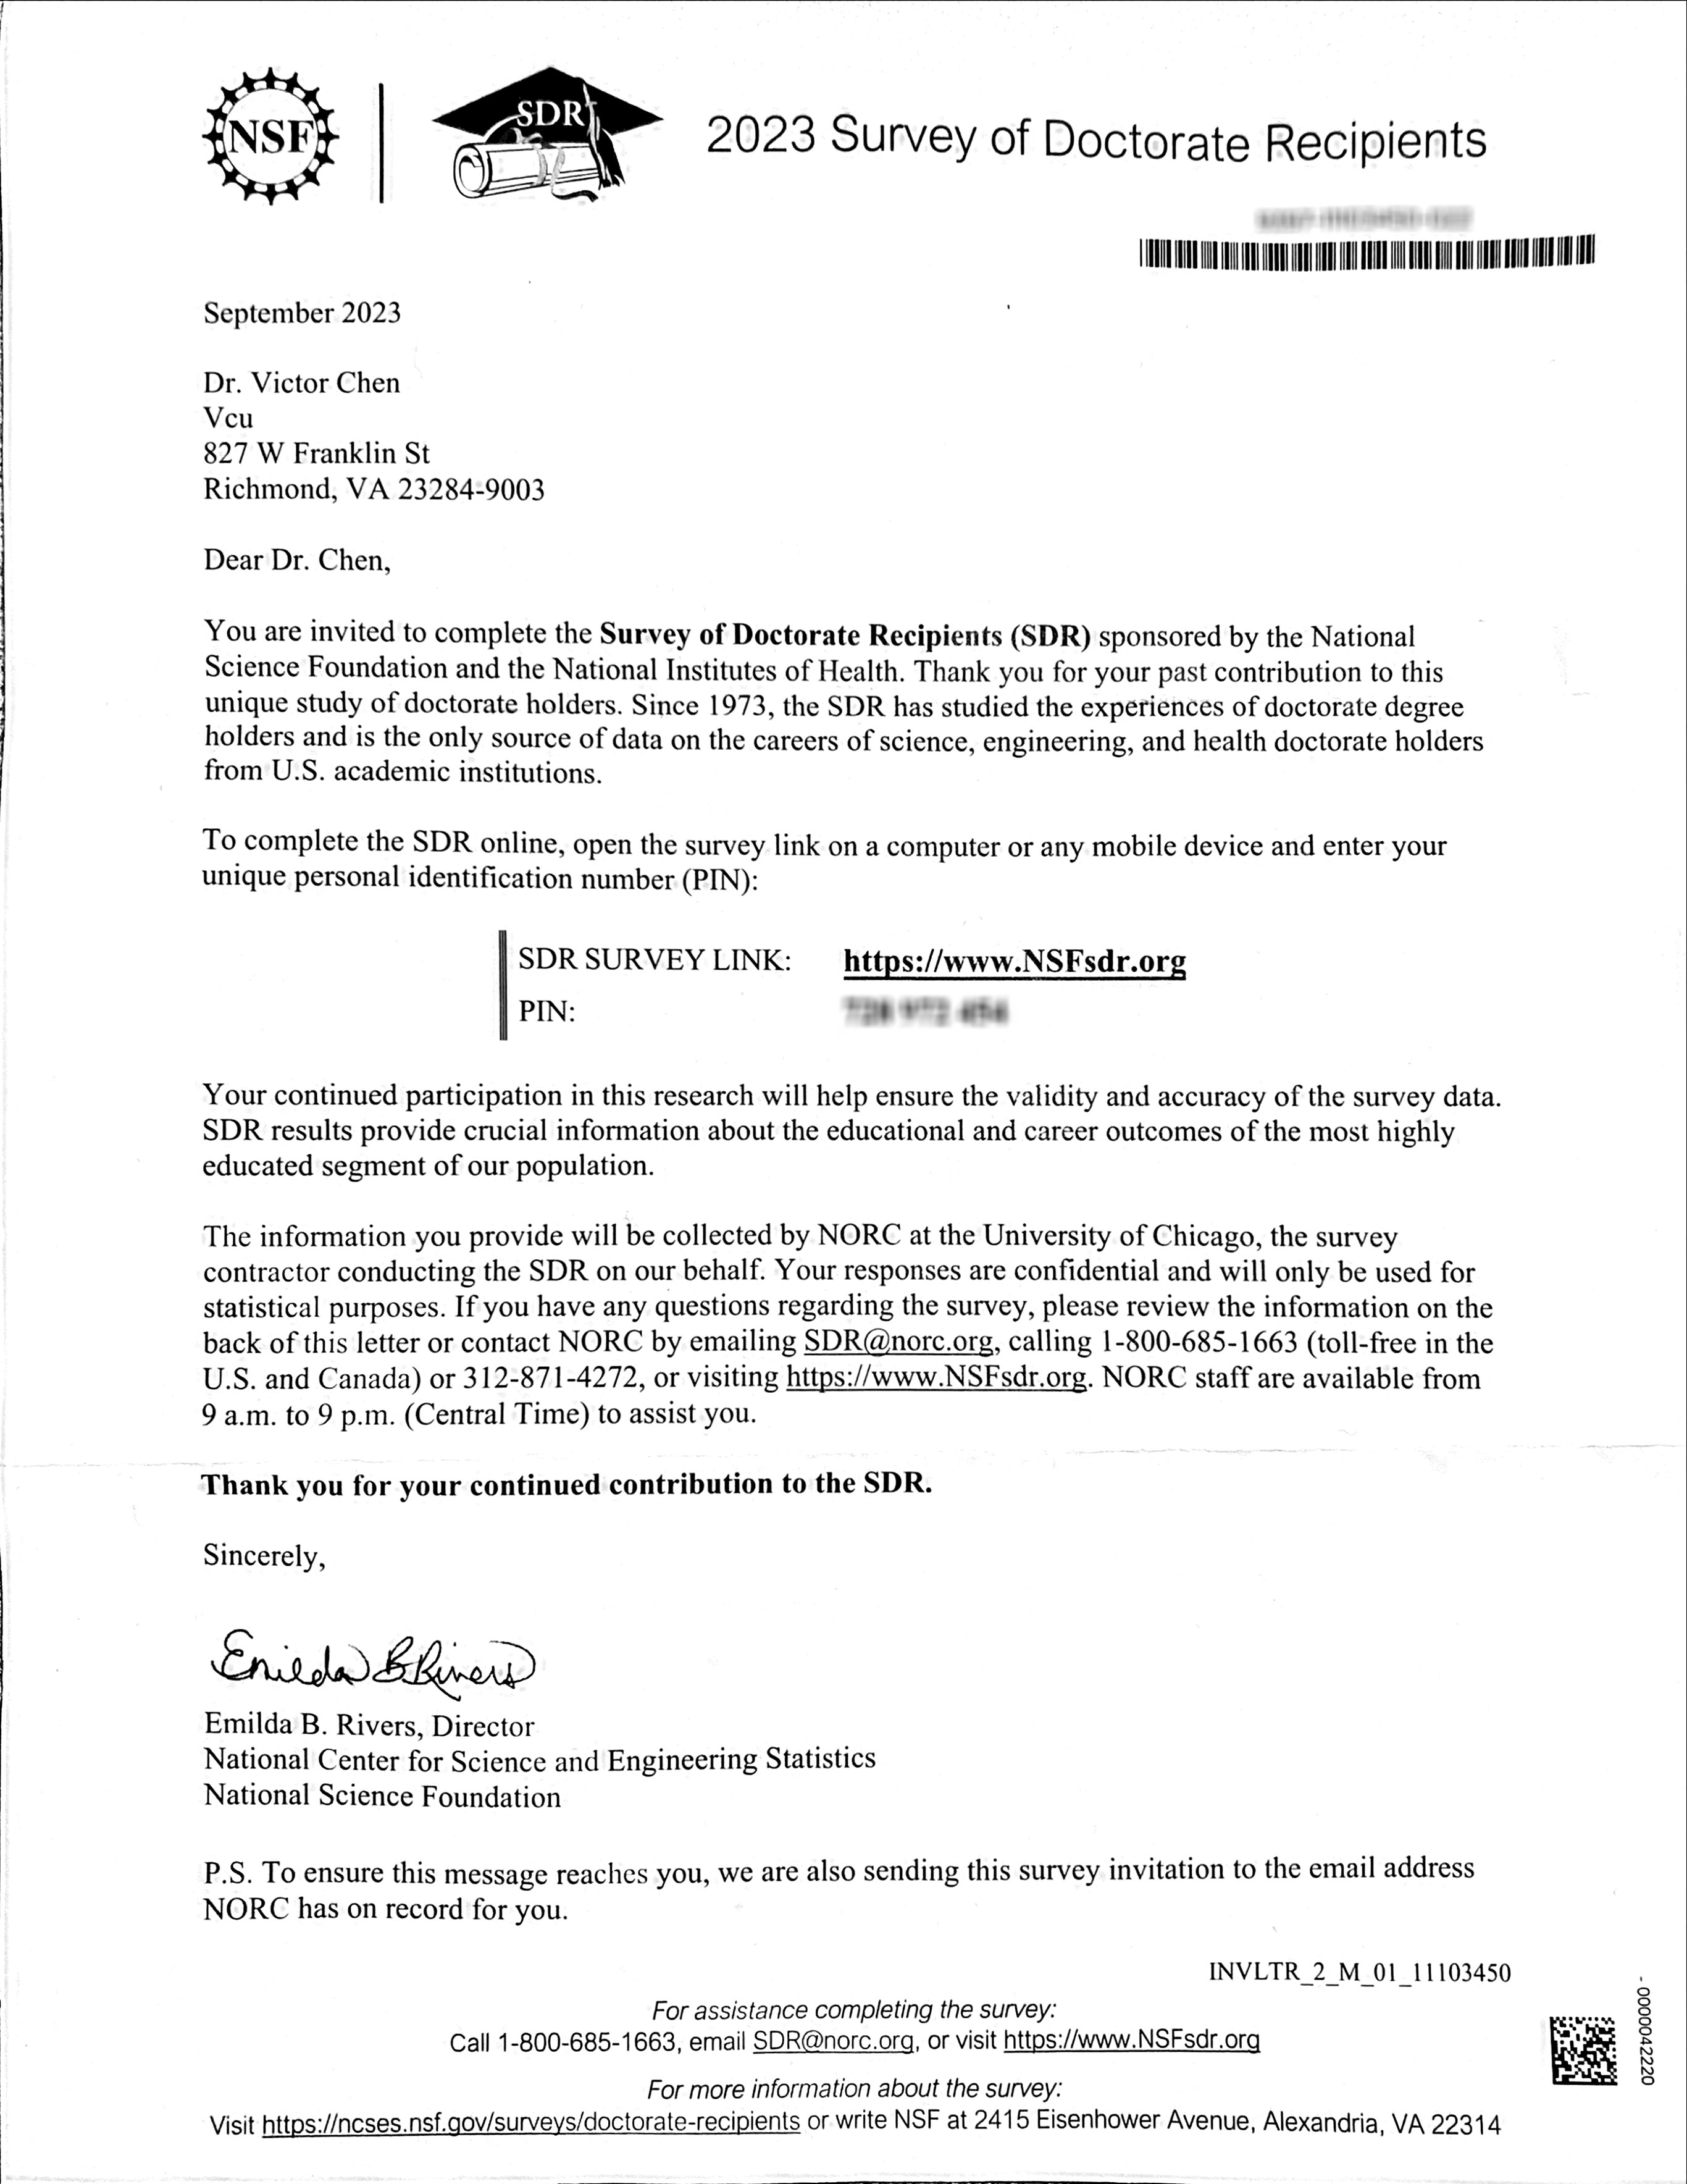 Letter from the NSF and NIH inviting the recipient to go to a link to complete the online survey of U.S. doctorate recipients.